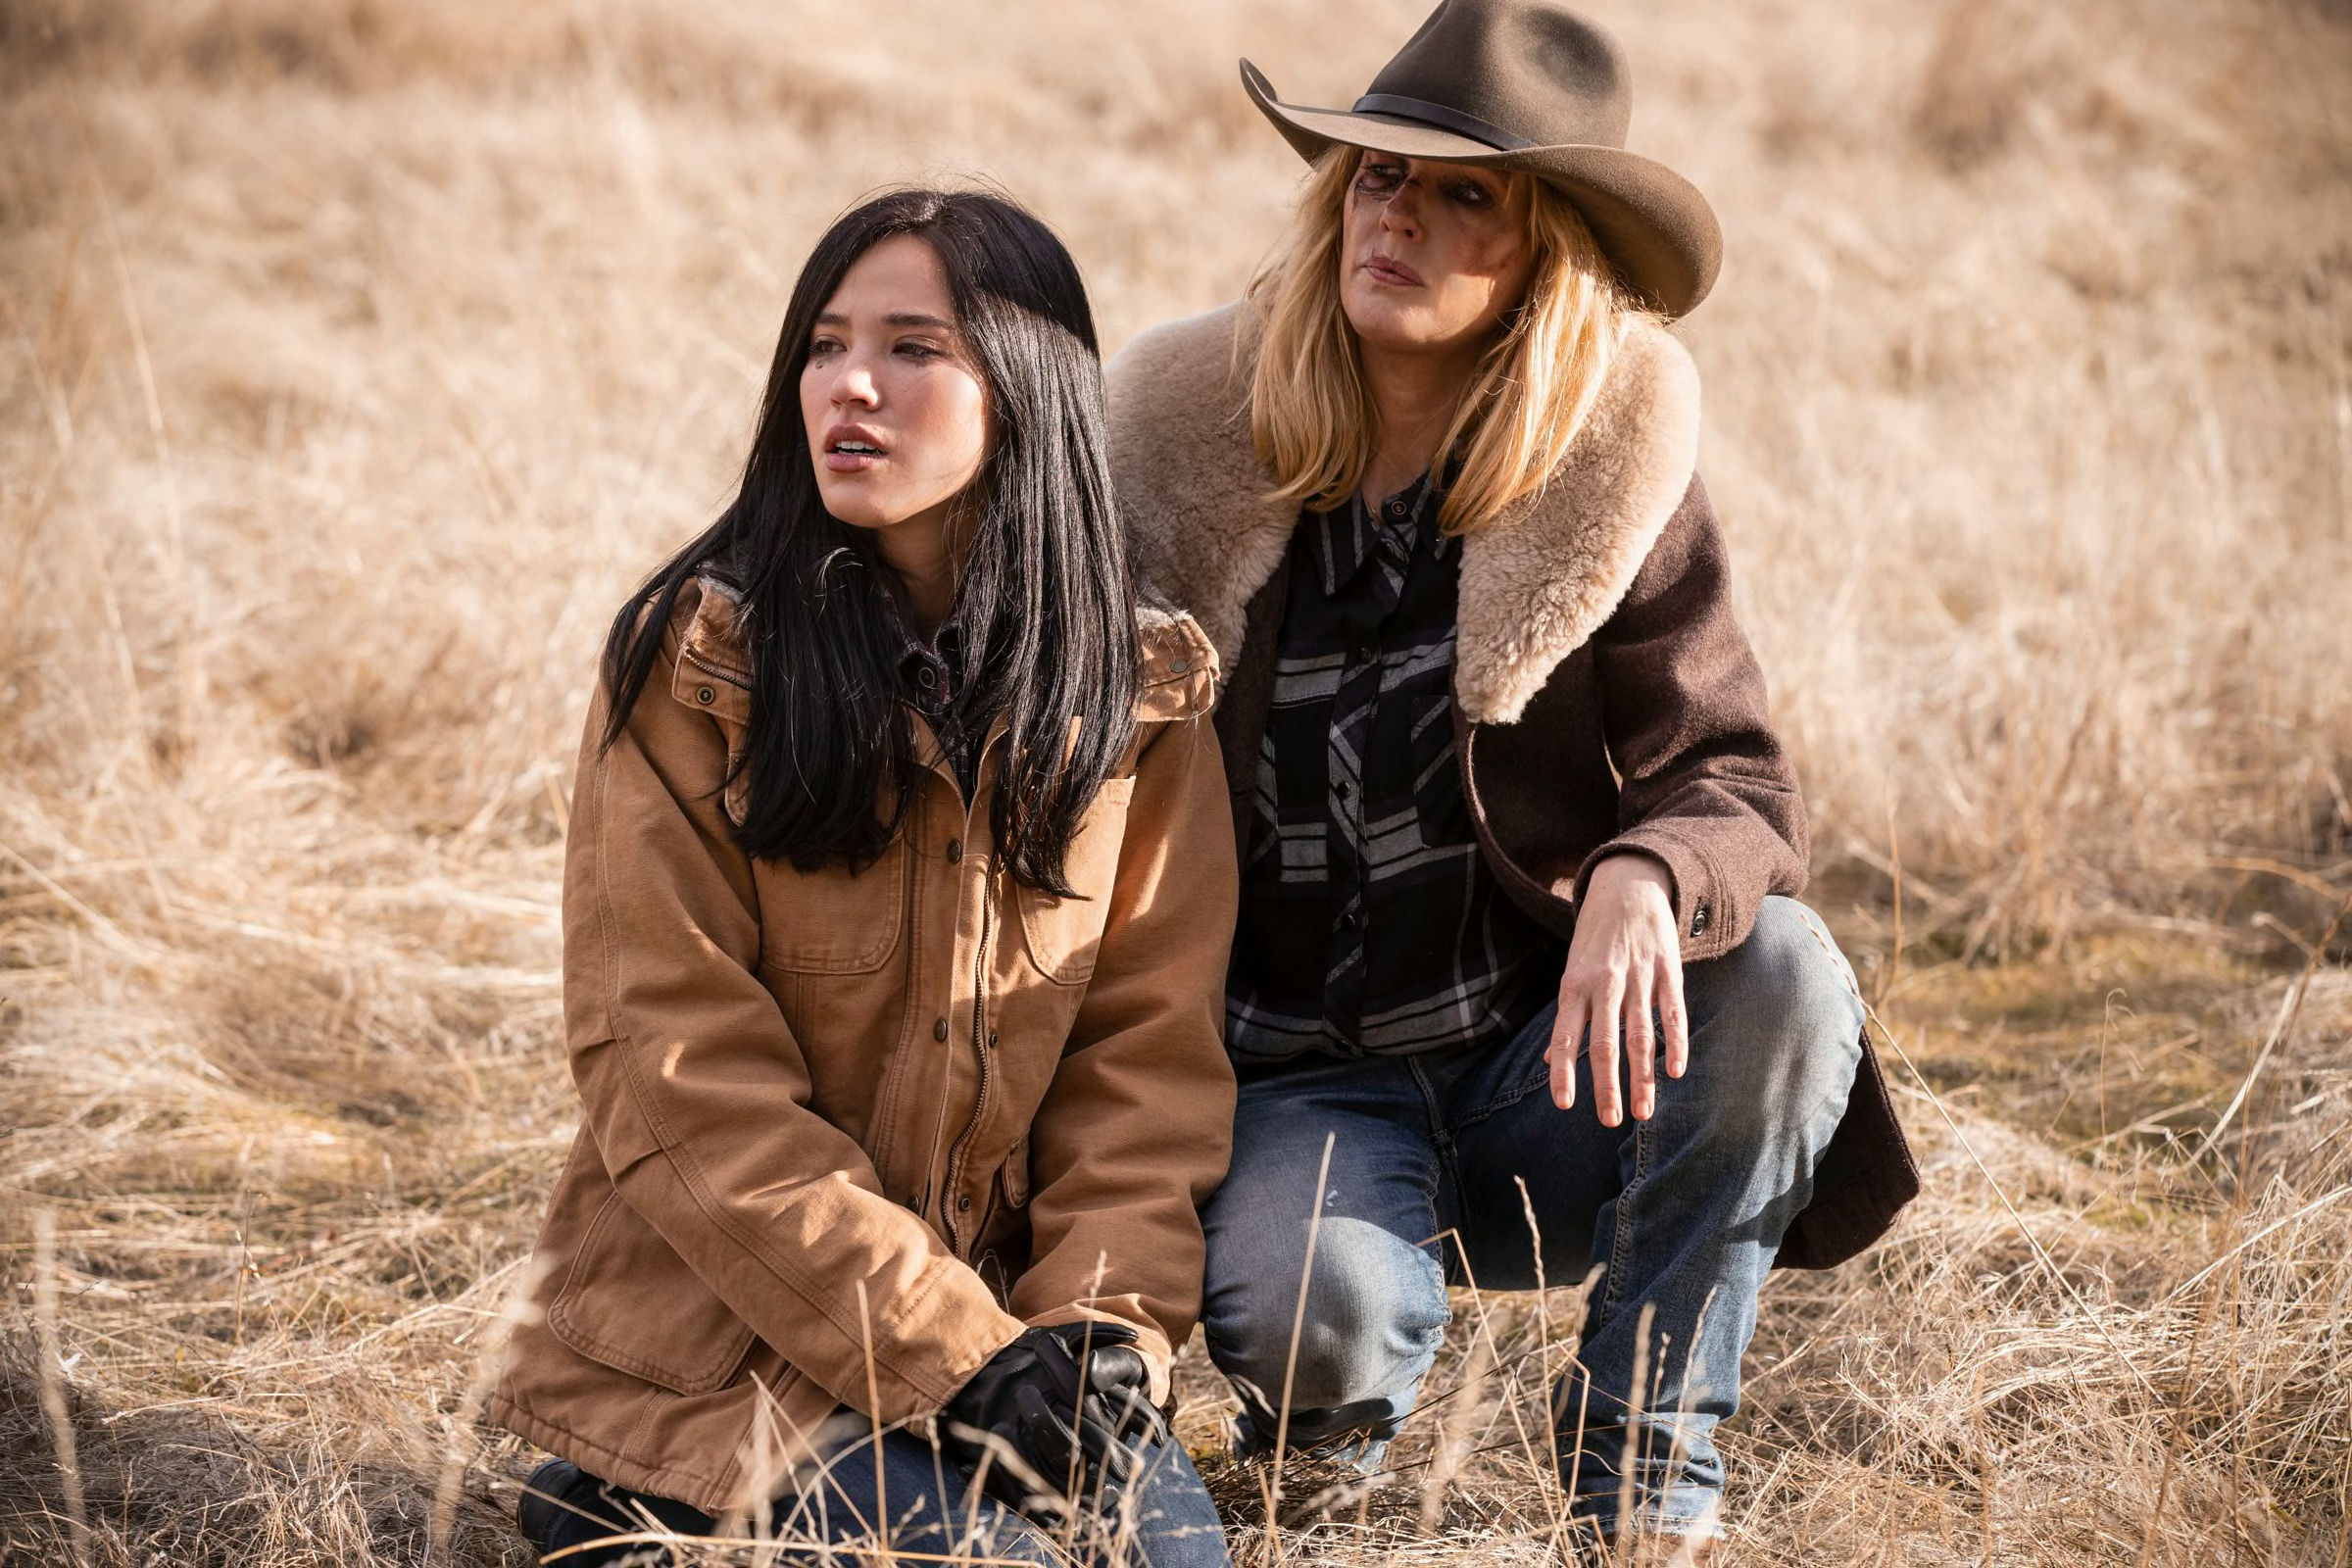 Yellowstone season 2 review The highs and lows of a tense season Page 2